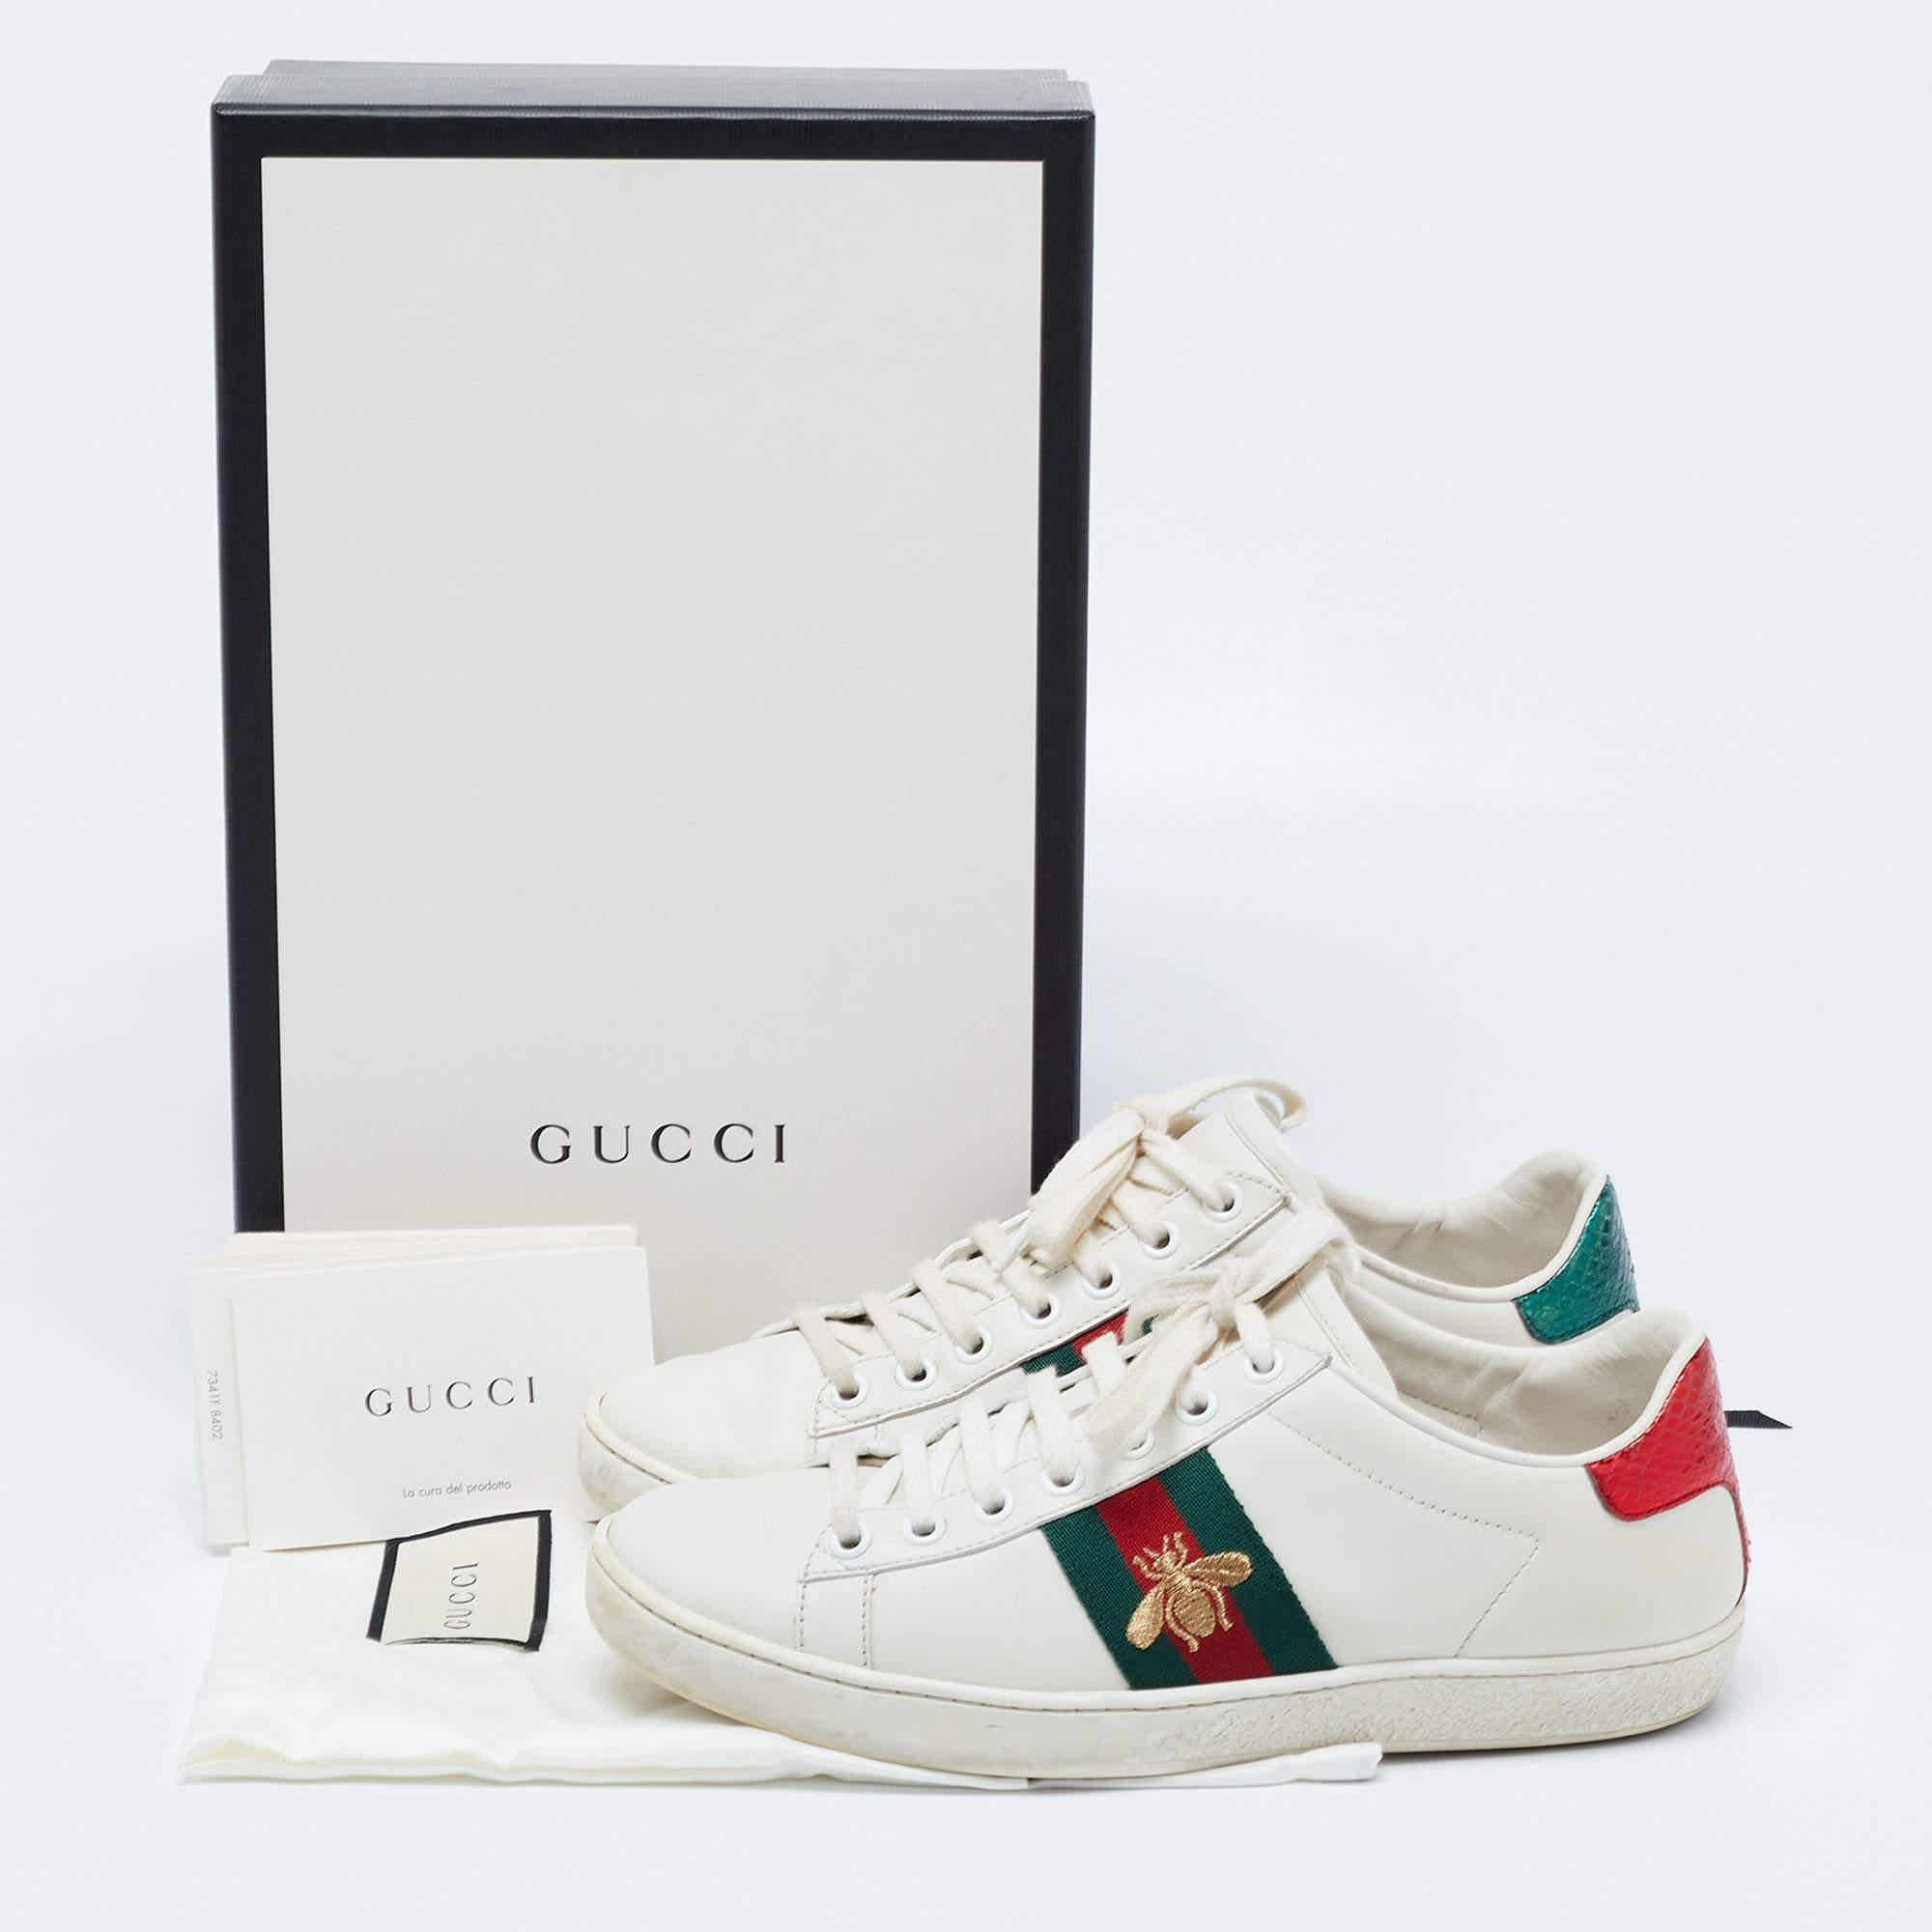 Gucci White Leather Embroidered Bee Ace Sneakers Size 36 7